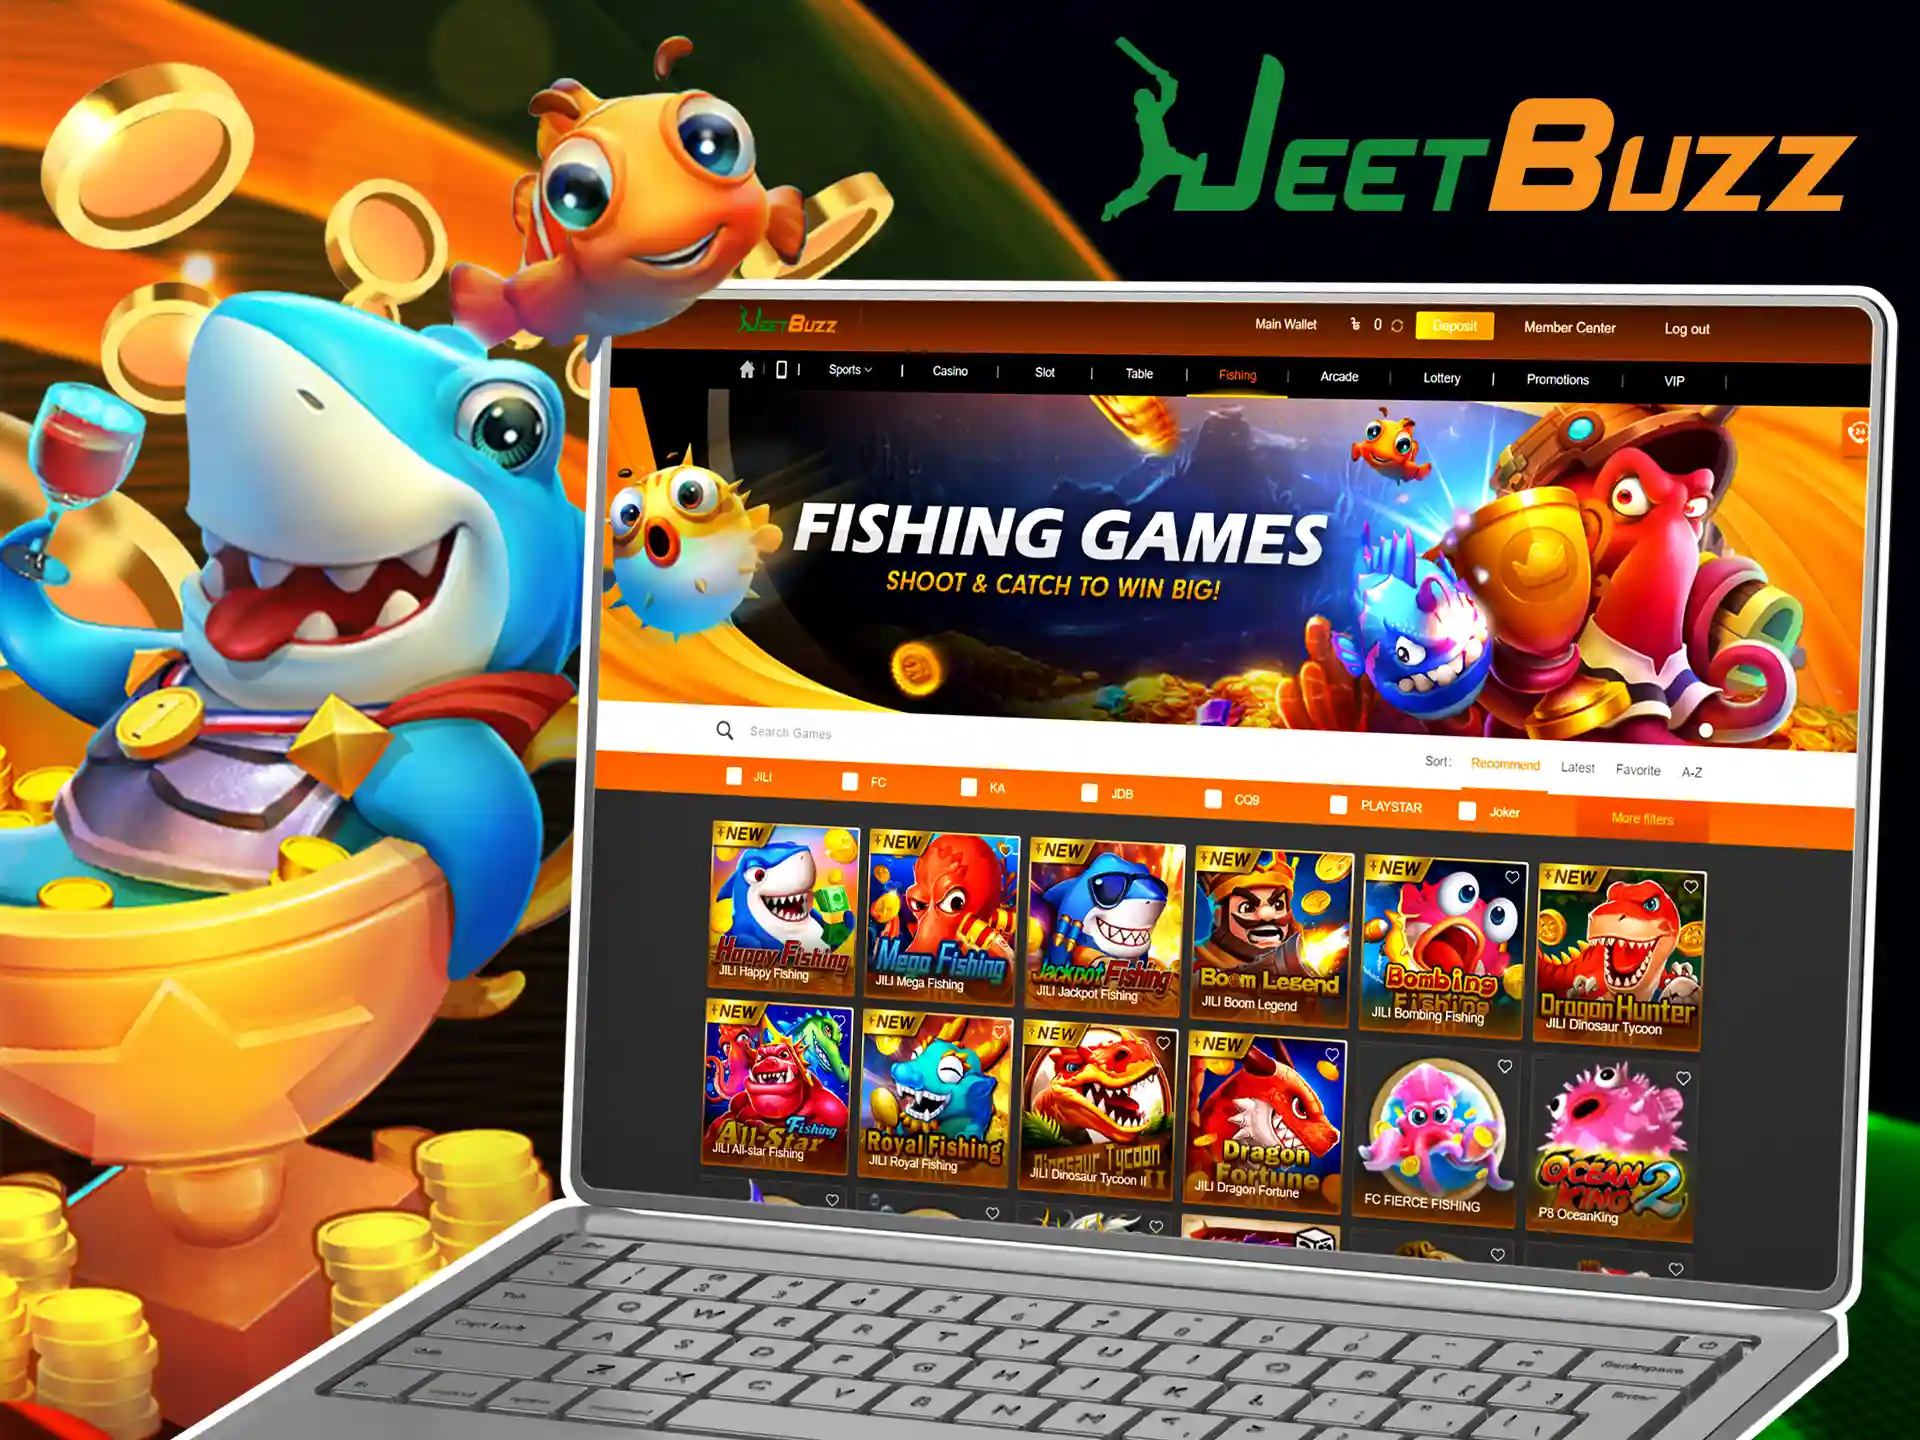 A variety of fishing games on JeetBuzz.